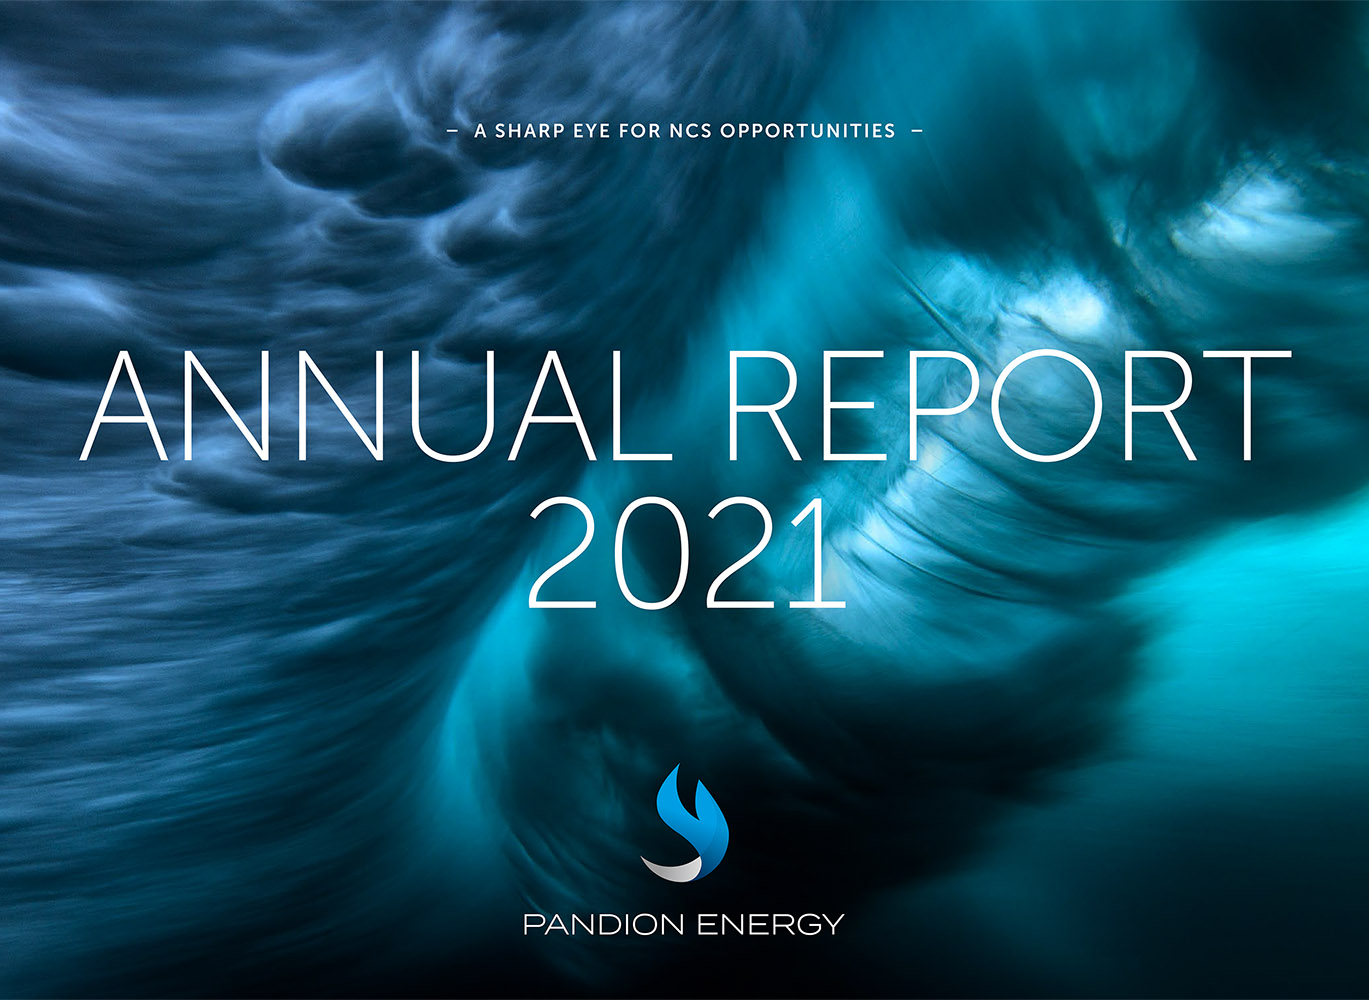 Publication of the annual report for 2021